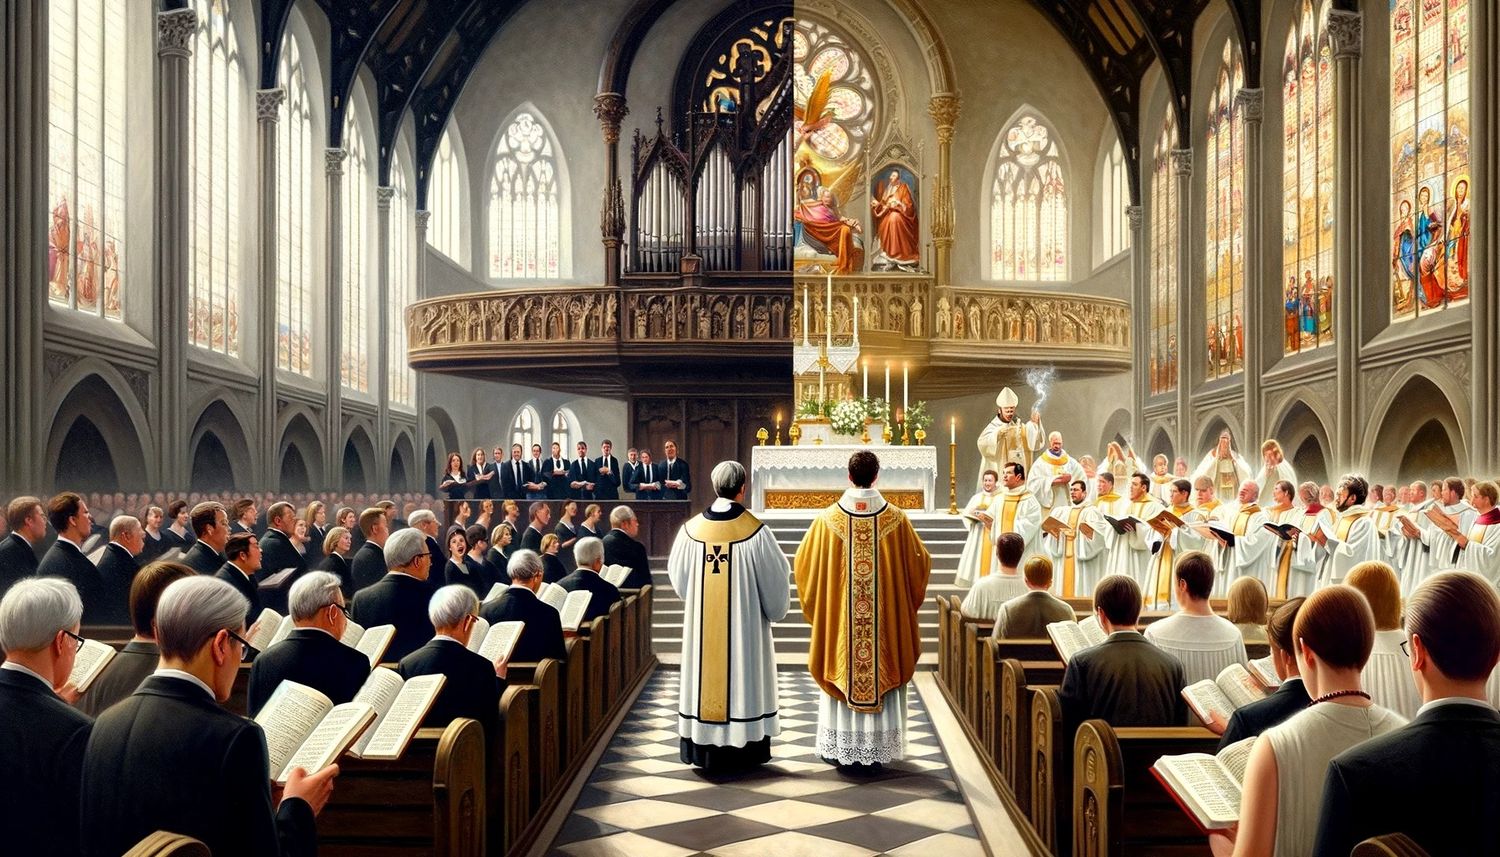 How Does Lutheran Differ From Christianity